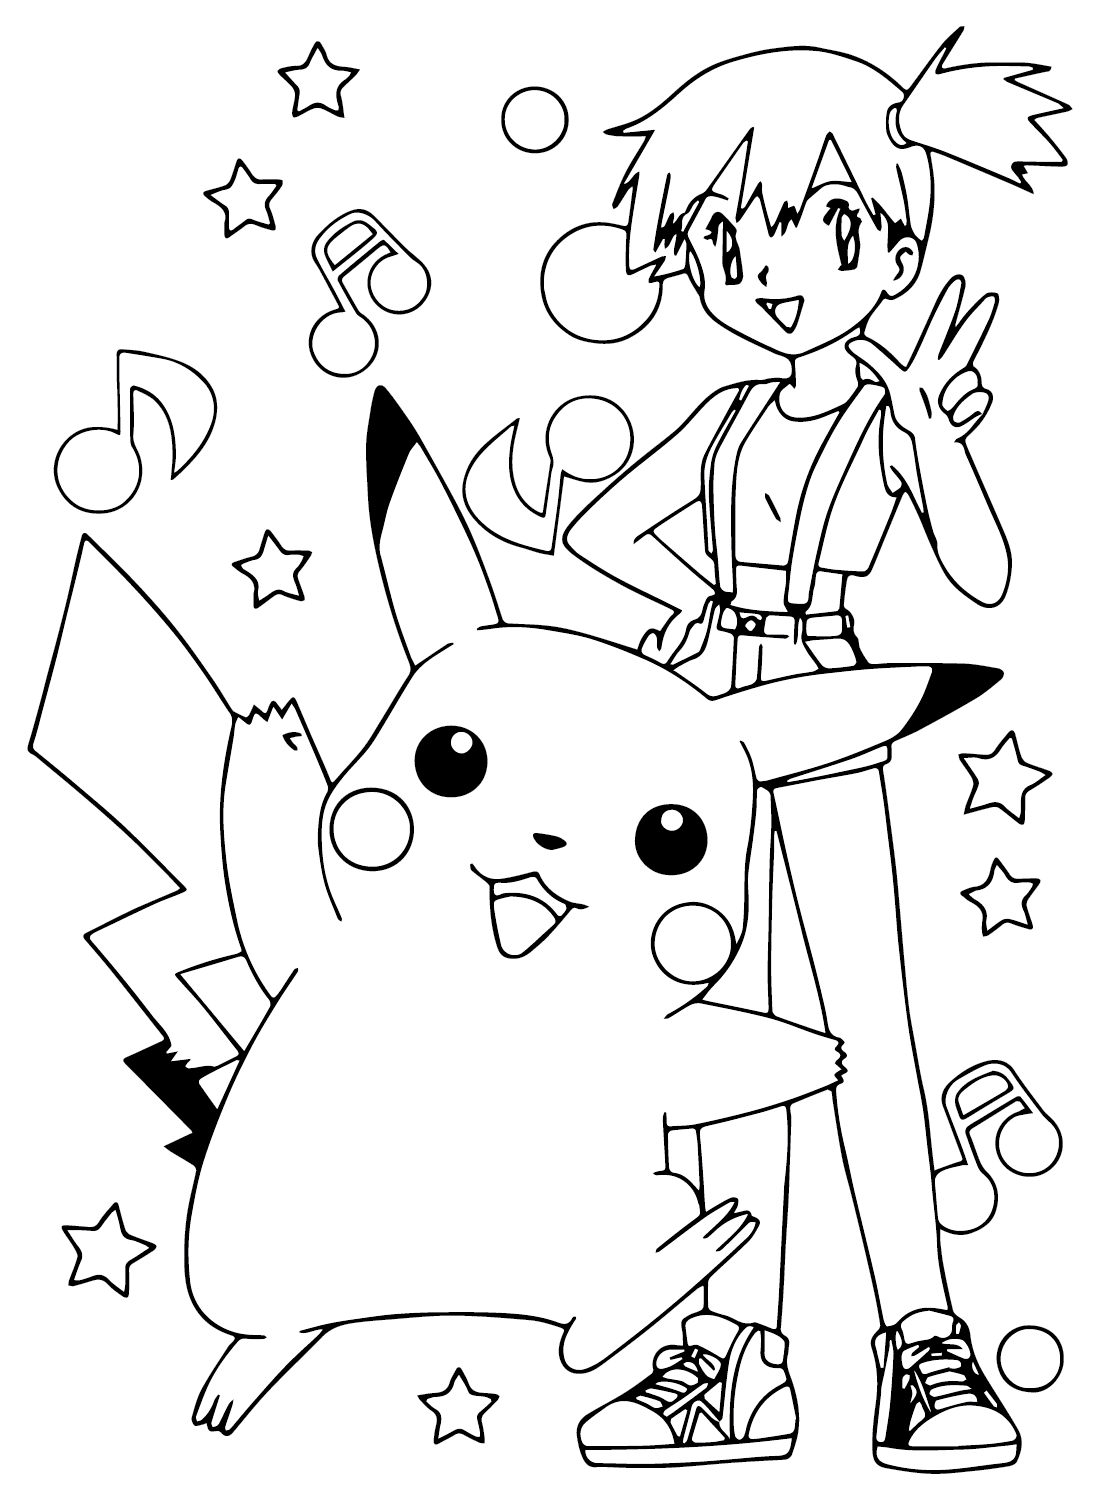 Misty with Pikachu Coloring Page from Pikachu